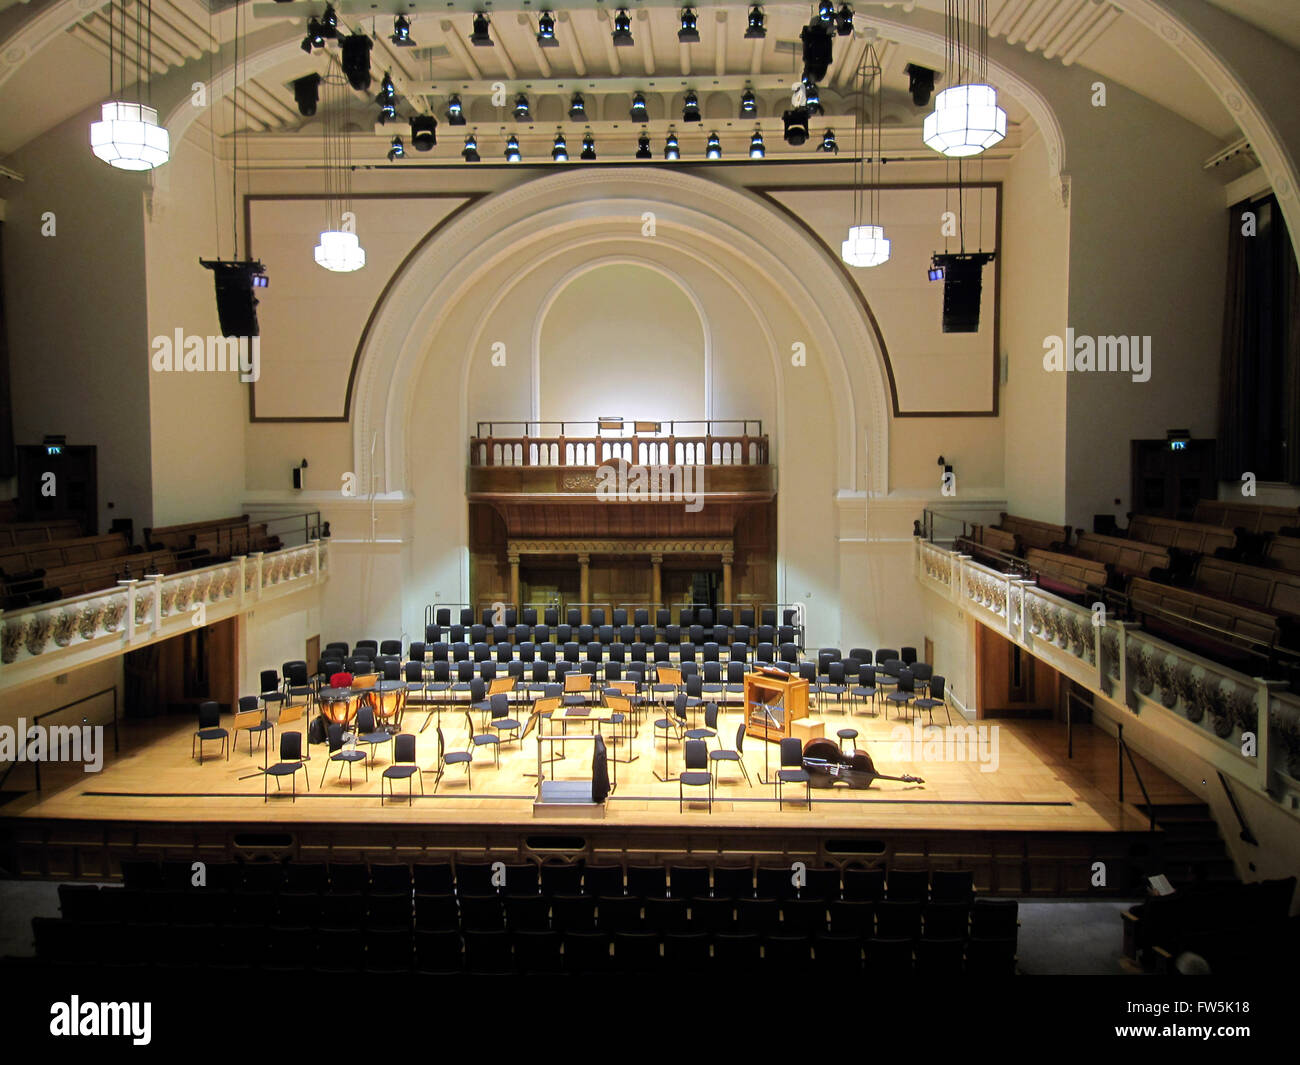 stage and auditorium of the concert platform of the Cadogan Hall, a new concert hall near Sloane Square, London, home of the Royal Philharmonic Orchestra, RPO. With dormant double bass. Stock Photo